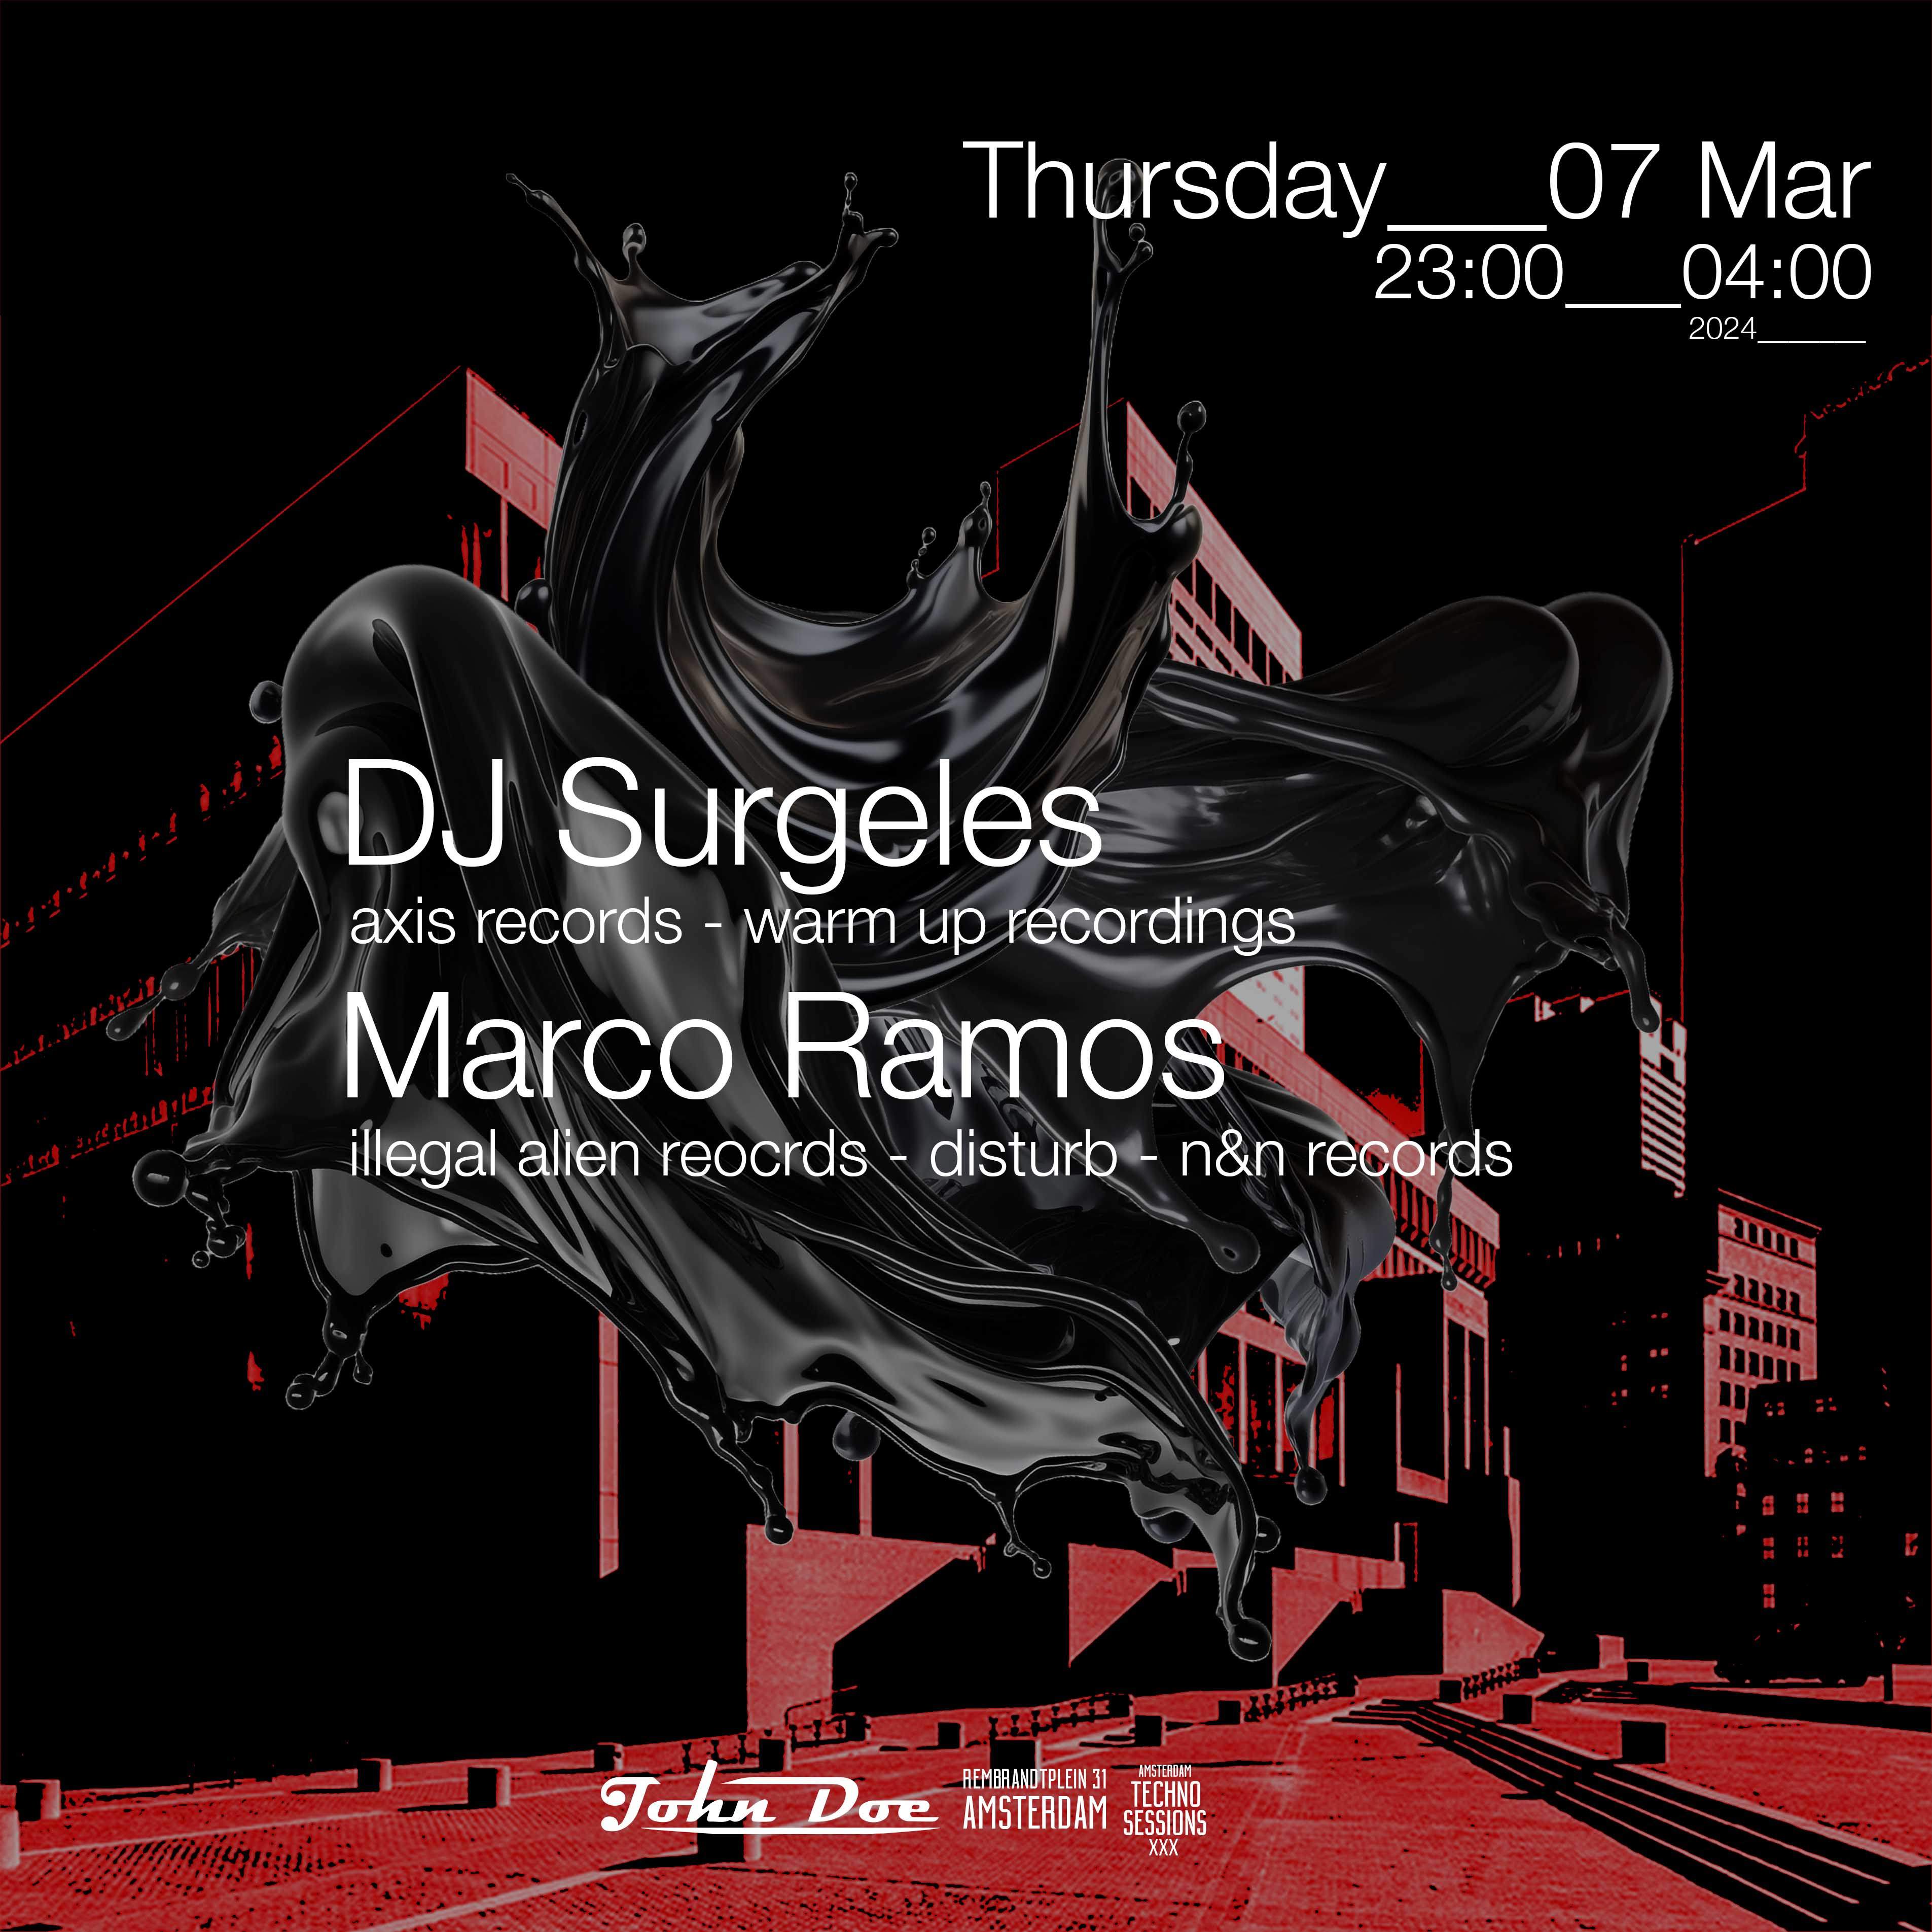 Amsterdam Techno Sessions with DJ Surgeles (Axis Records - Warm Up Recordings) - フライヤー表